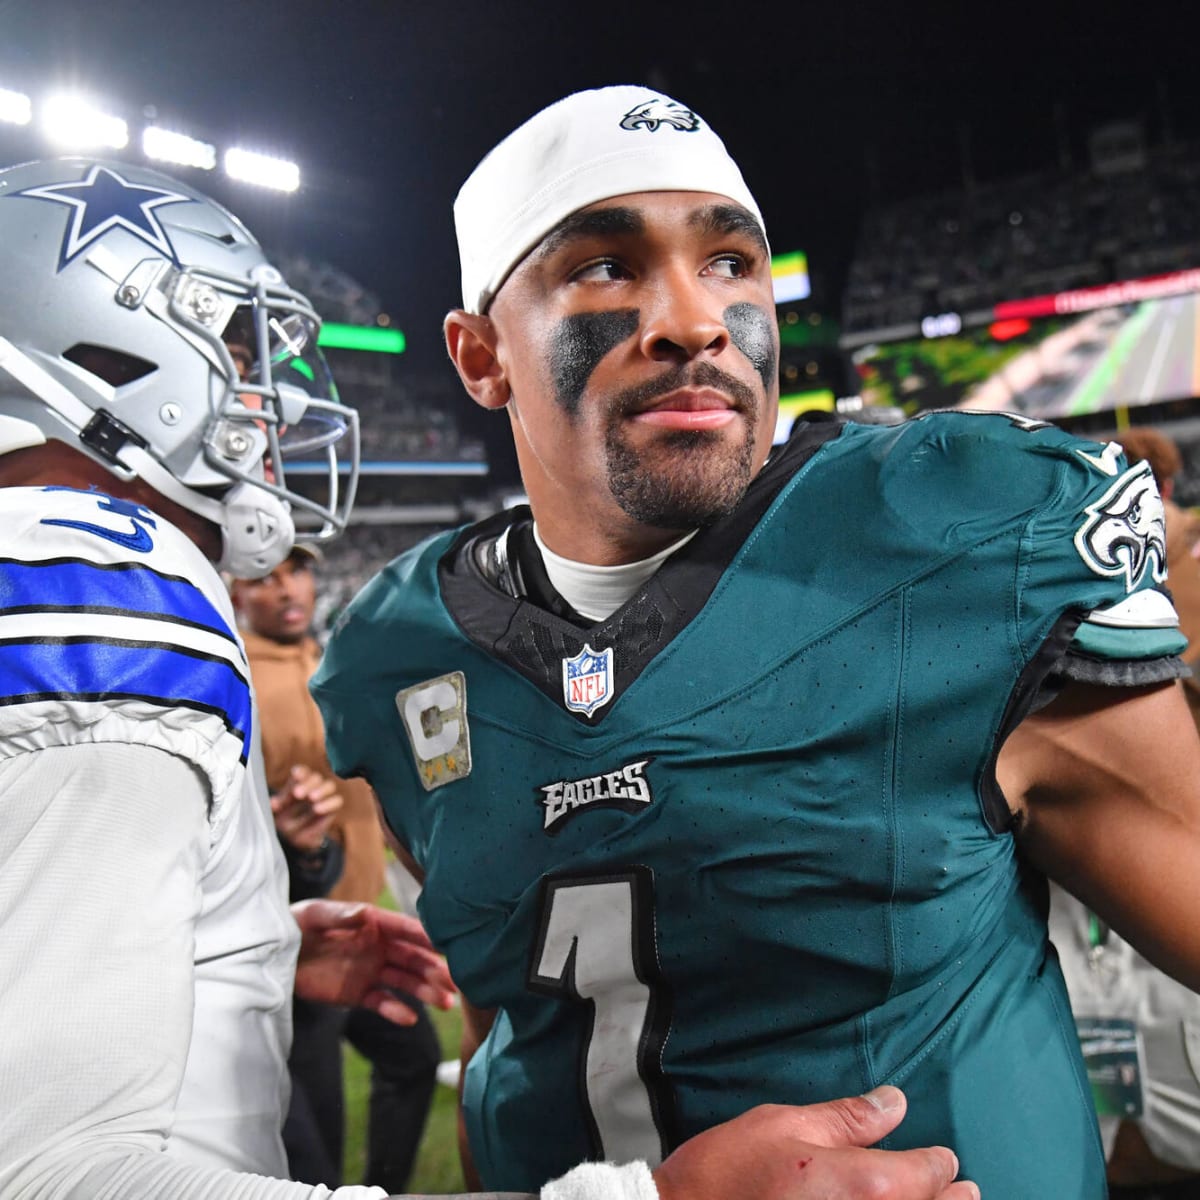 Eagles-Chiefs preview: This could be a downfall during MNF in